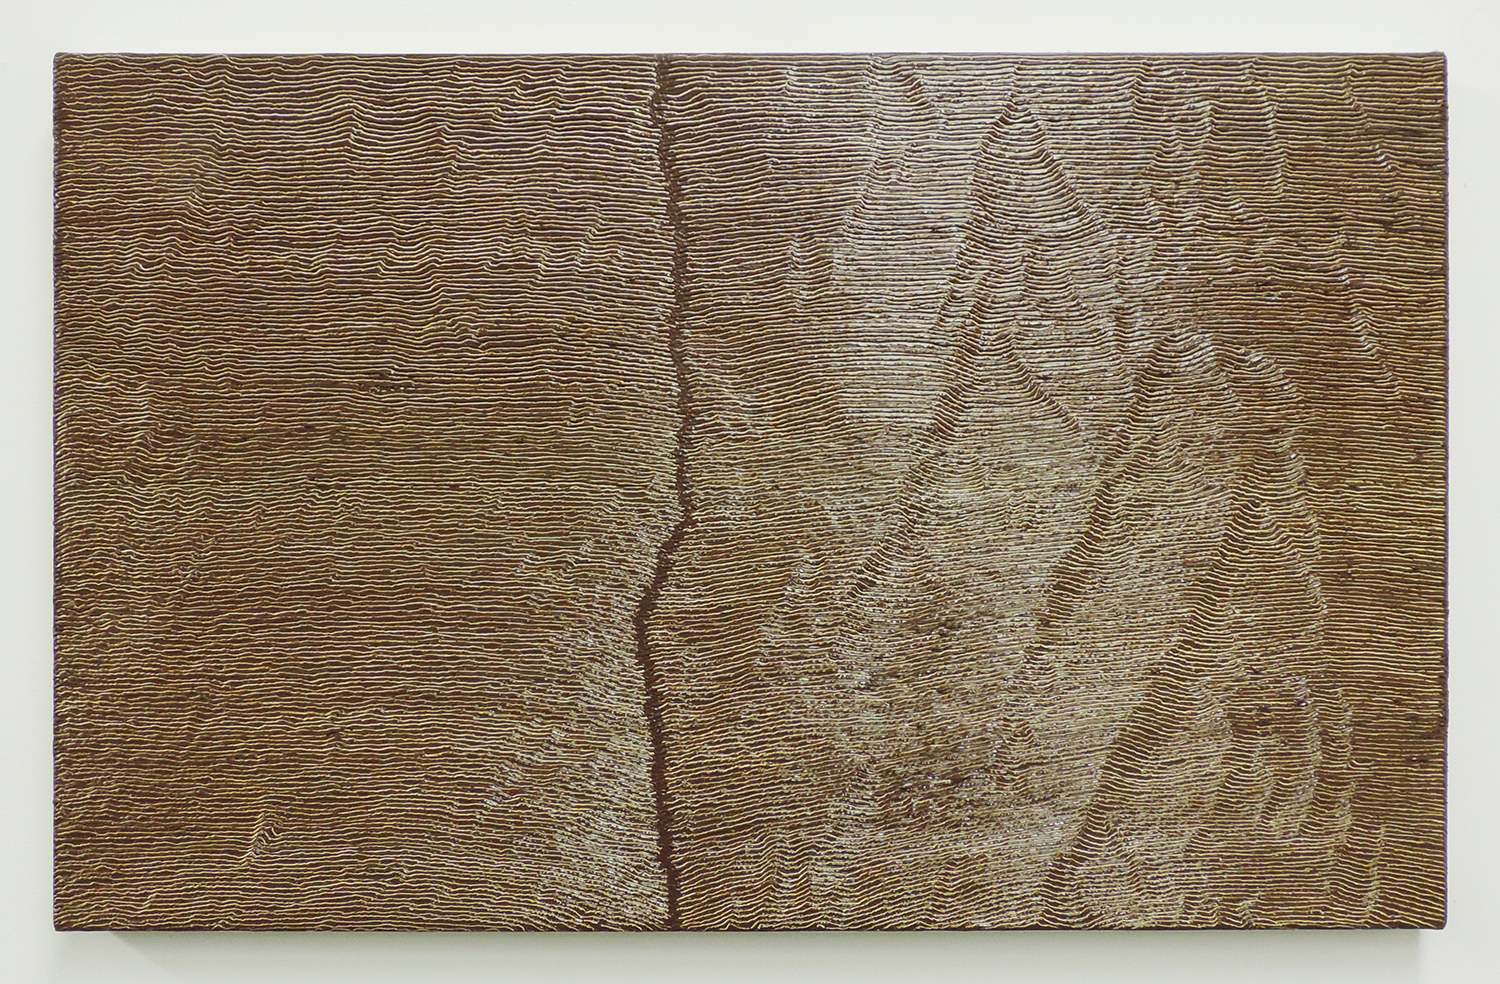 Fissure 1<br>Oil and Amber on canvas over panel｜33.7 x 53.4 cm, 2001